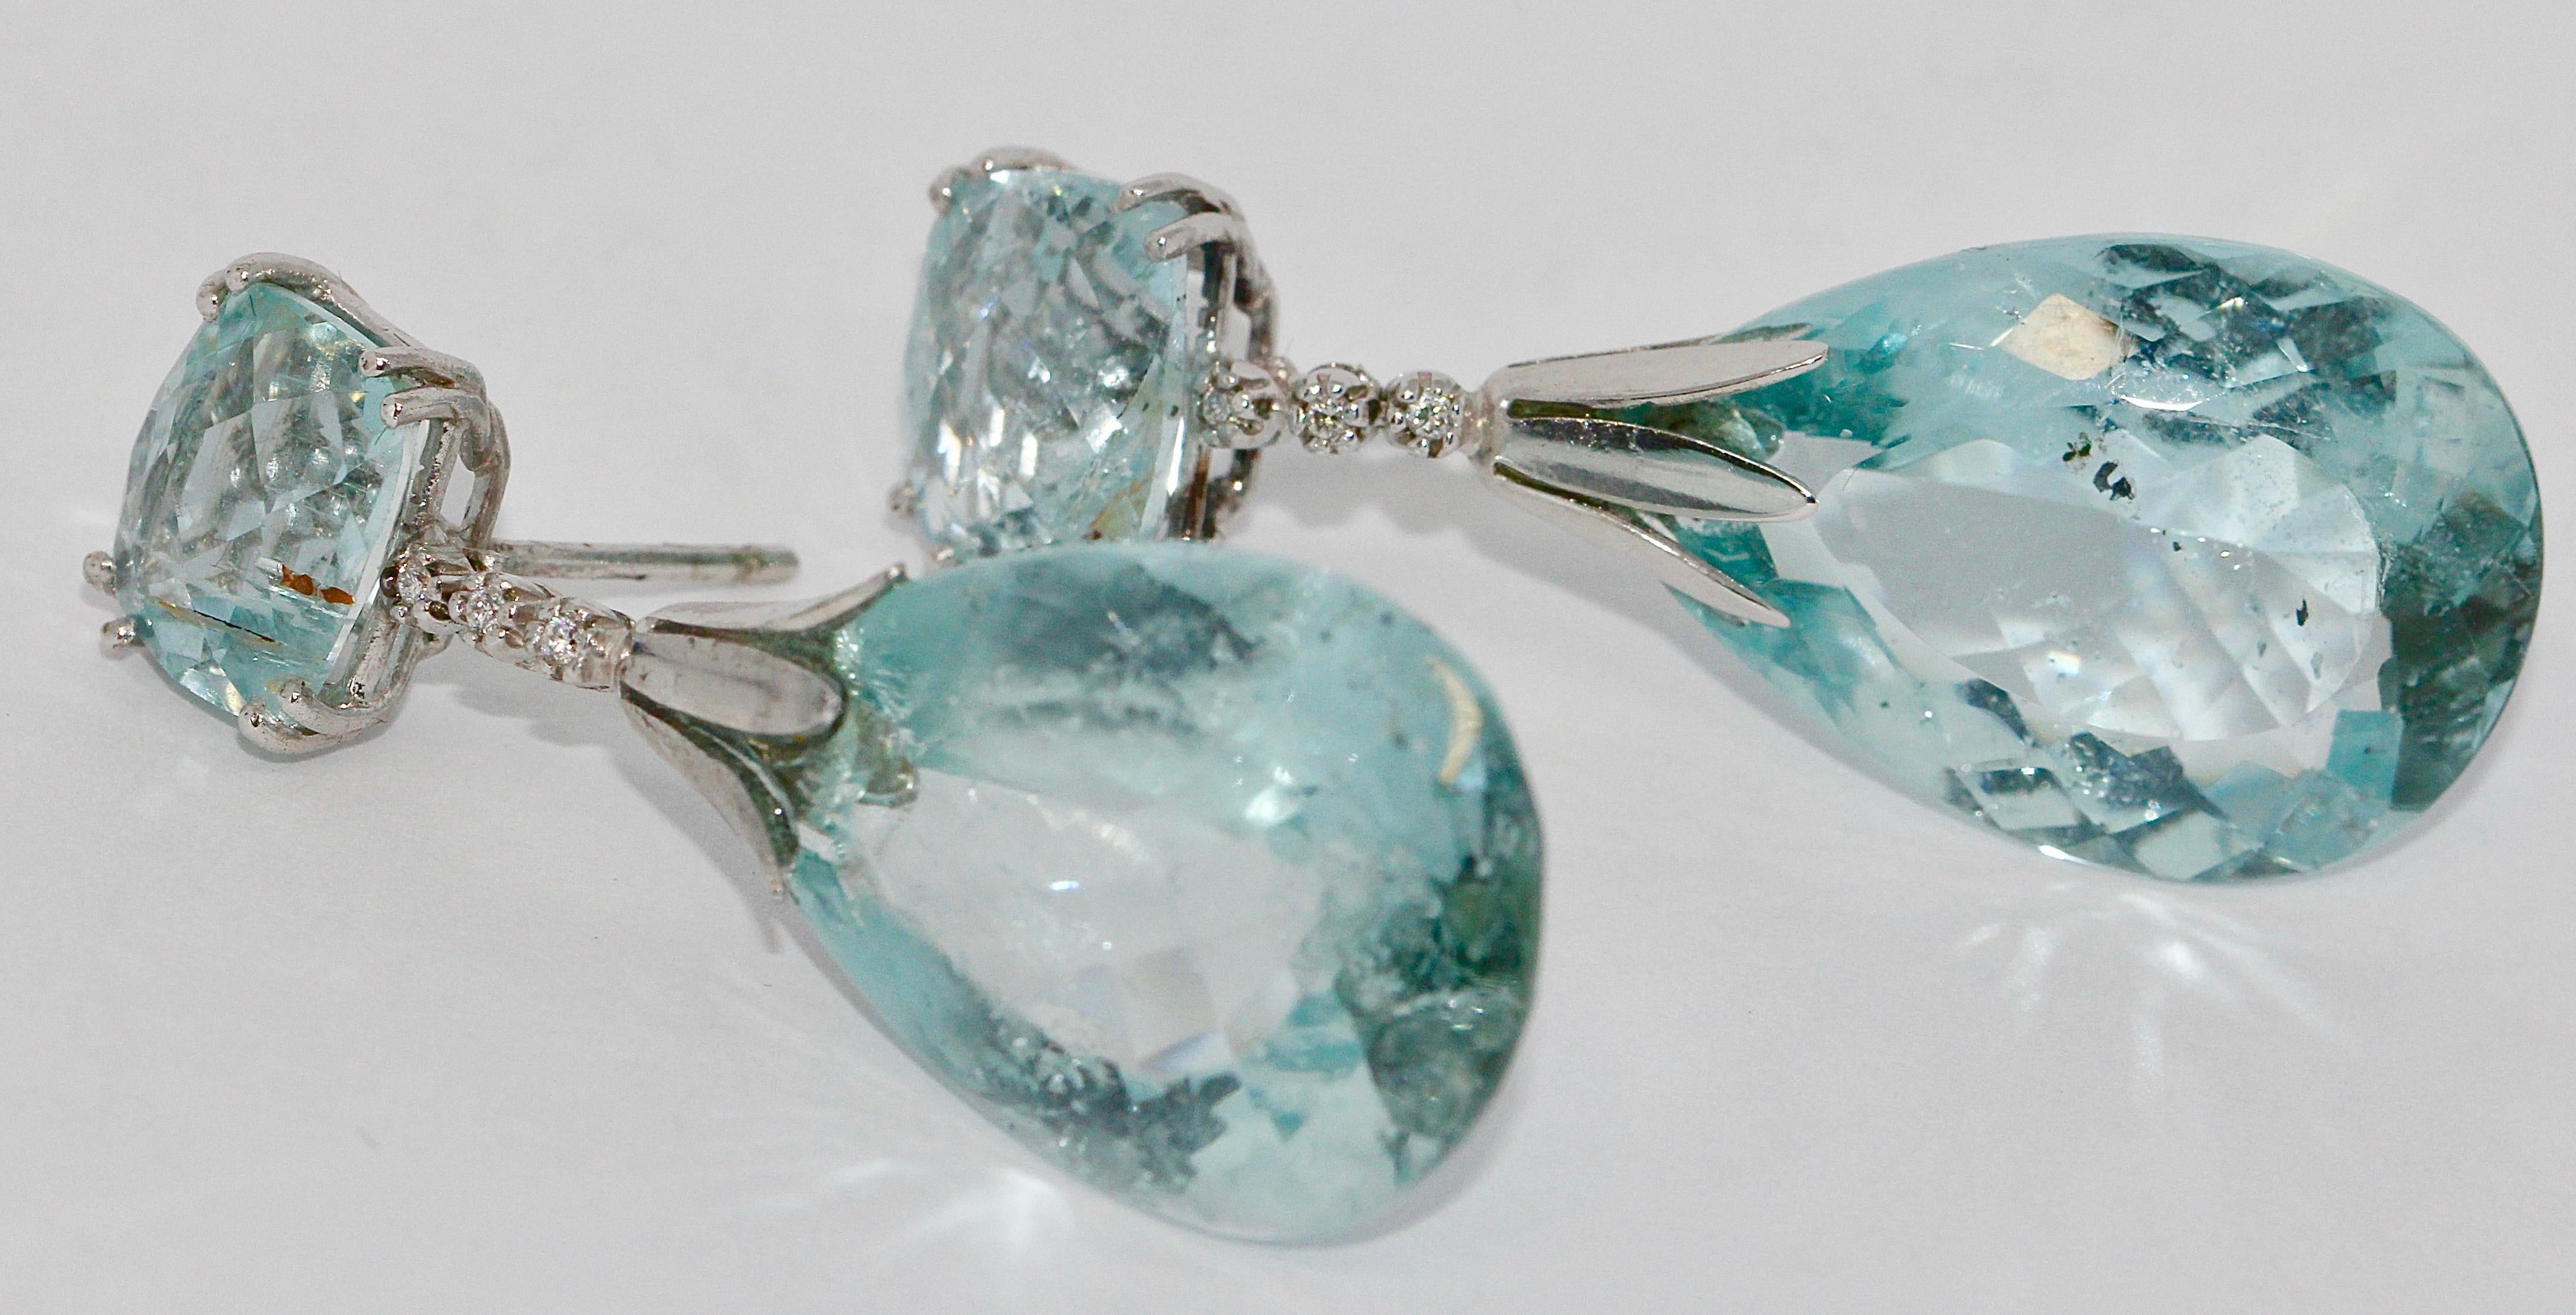 Natural Aquamarine drop, stud earrings, with diamonds. 18 Karat white gold.

Enchanting, big aquamarine earrings with diamonds. Natural aquamarine stones with inclusions.

Length per earring is approx. 45mm.